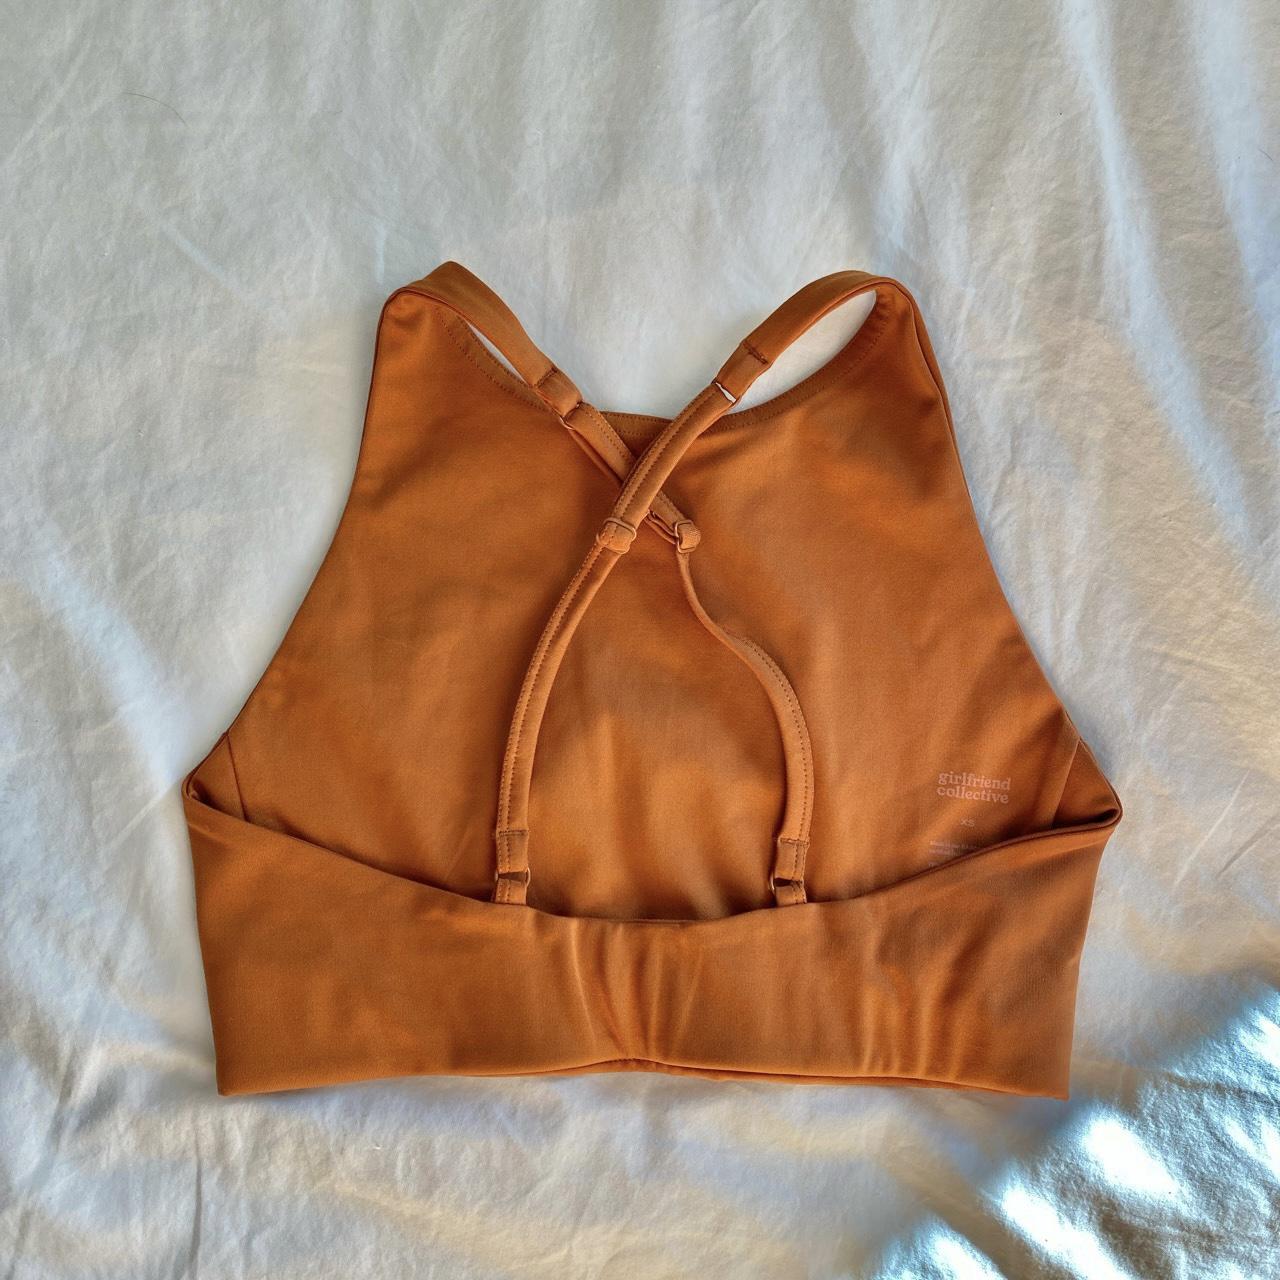 GF COLLECTIVE TOPANGA BRA in TRAIL 🍊 - from their... - Depop